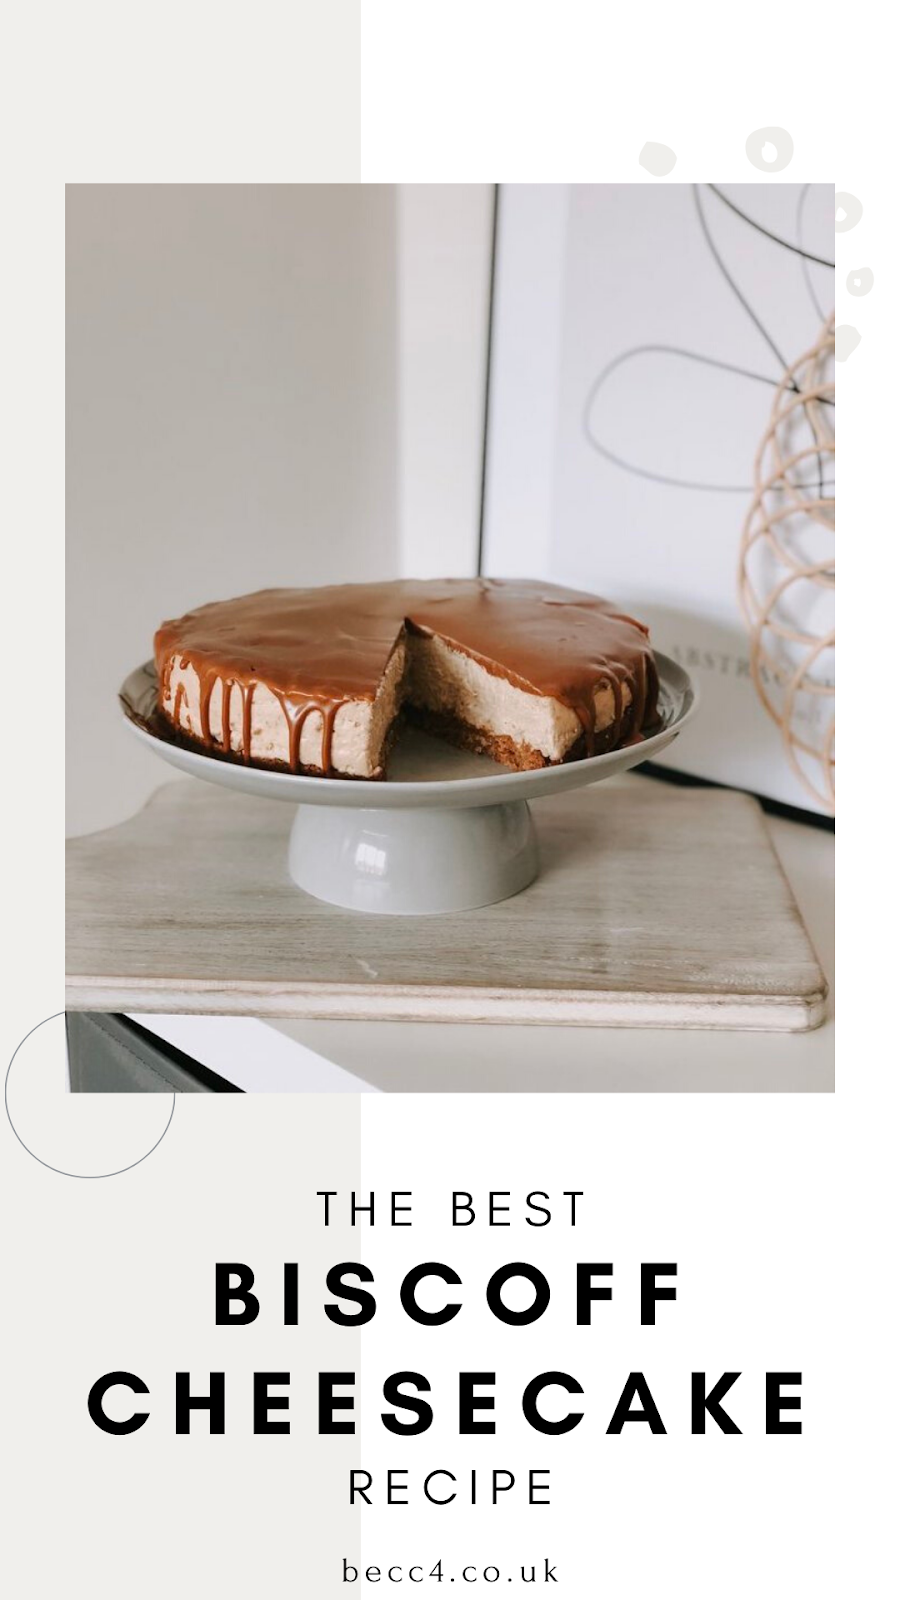 The best biscoff cheesecake recipe. An easy, delicious bake using little equipment and the infamous Biscuit spread.